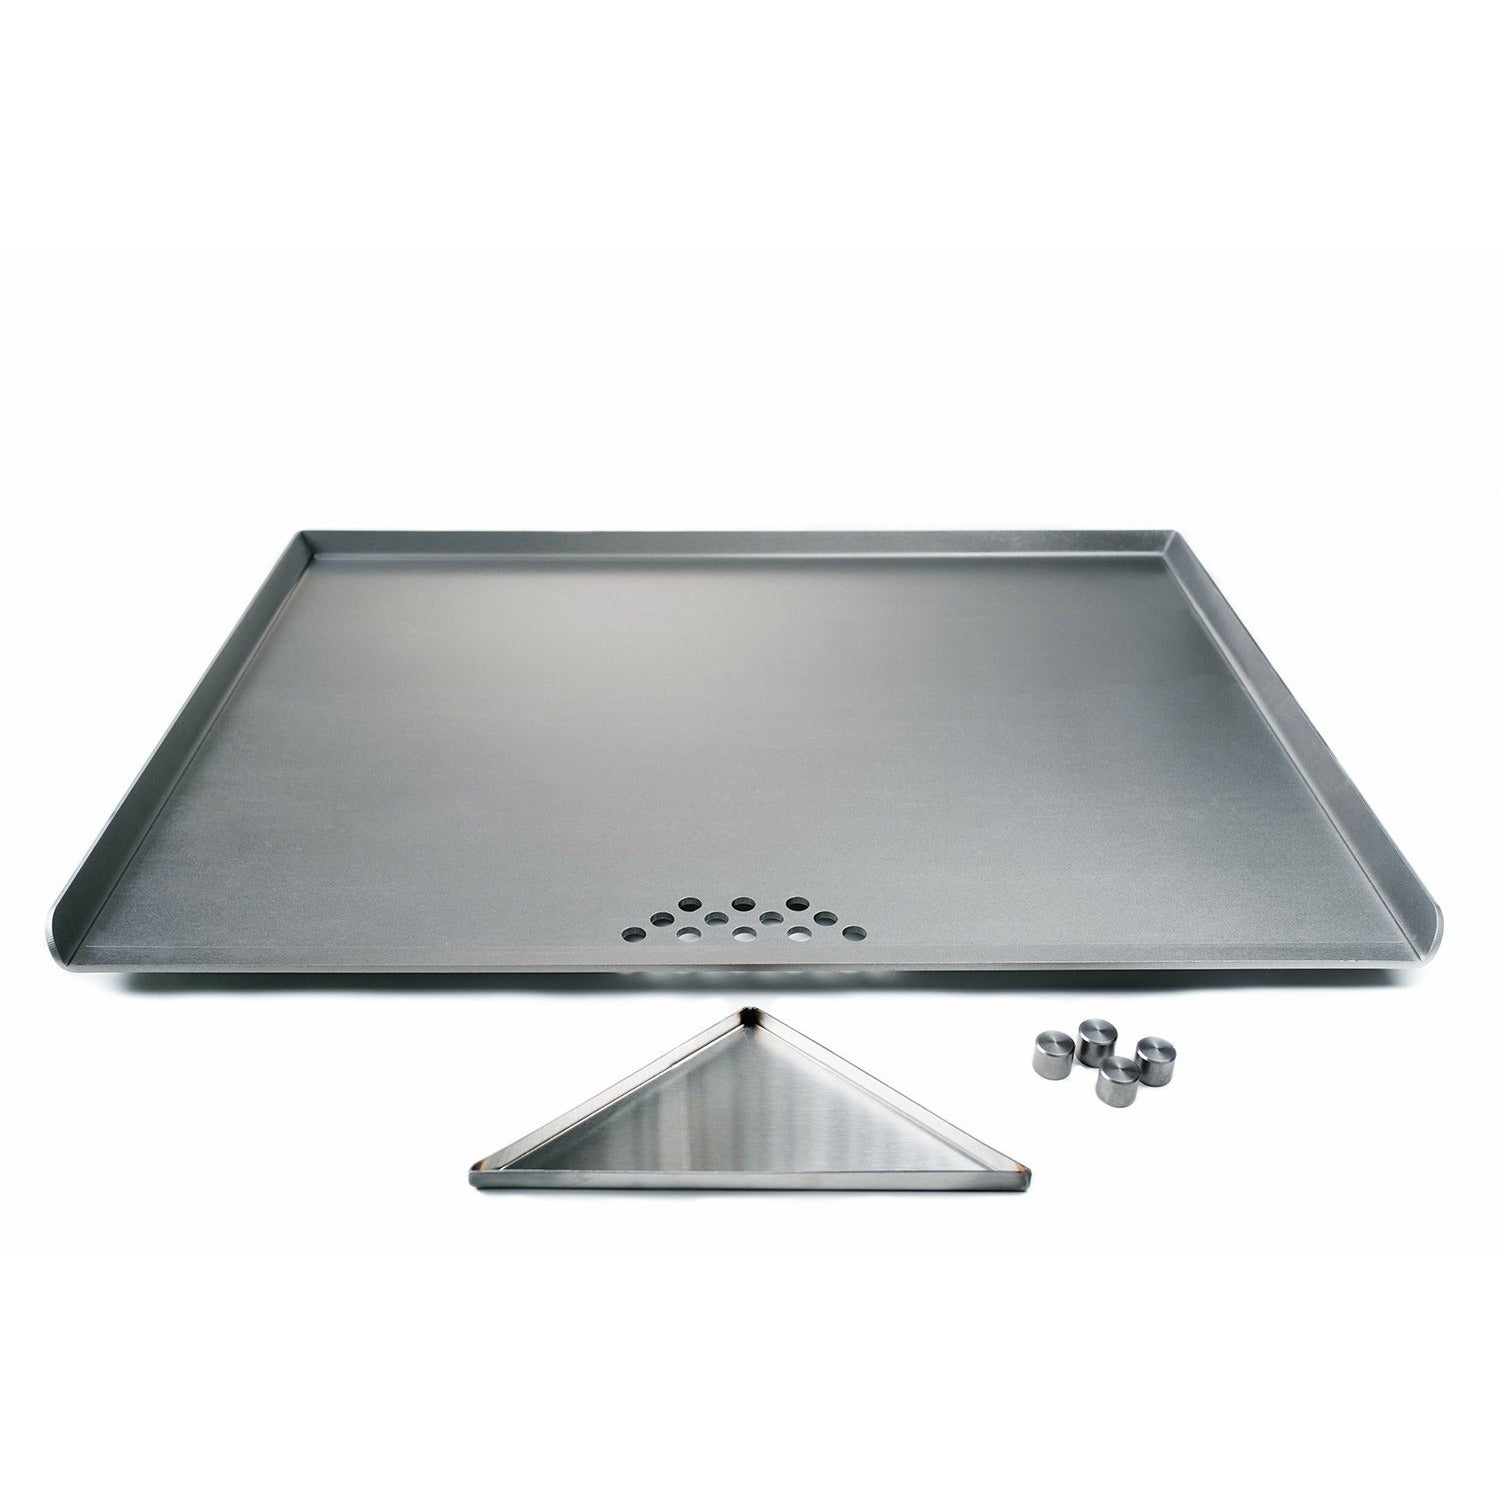 Steelmade Flat Top Grill - 30" Glass Ceramic Range Stoves Flat Top Griddle Steelmade